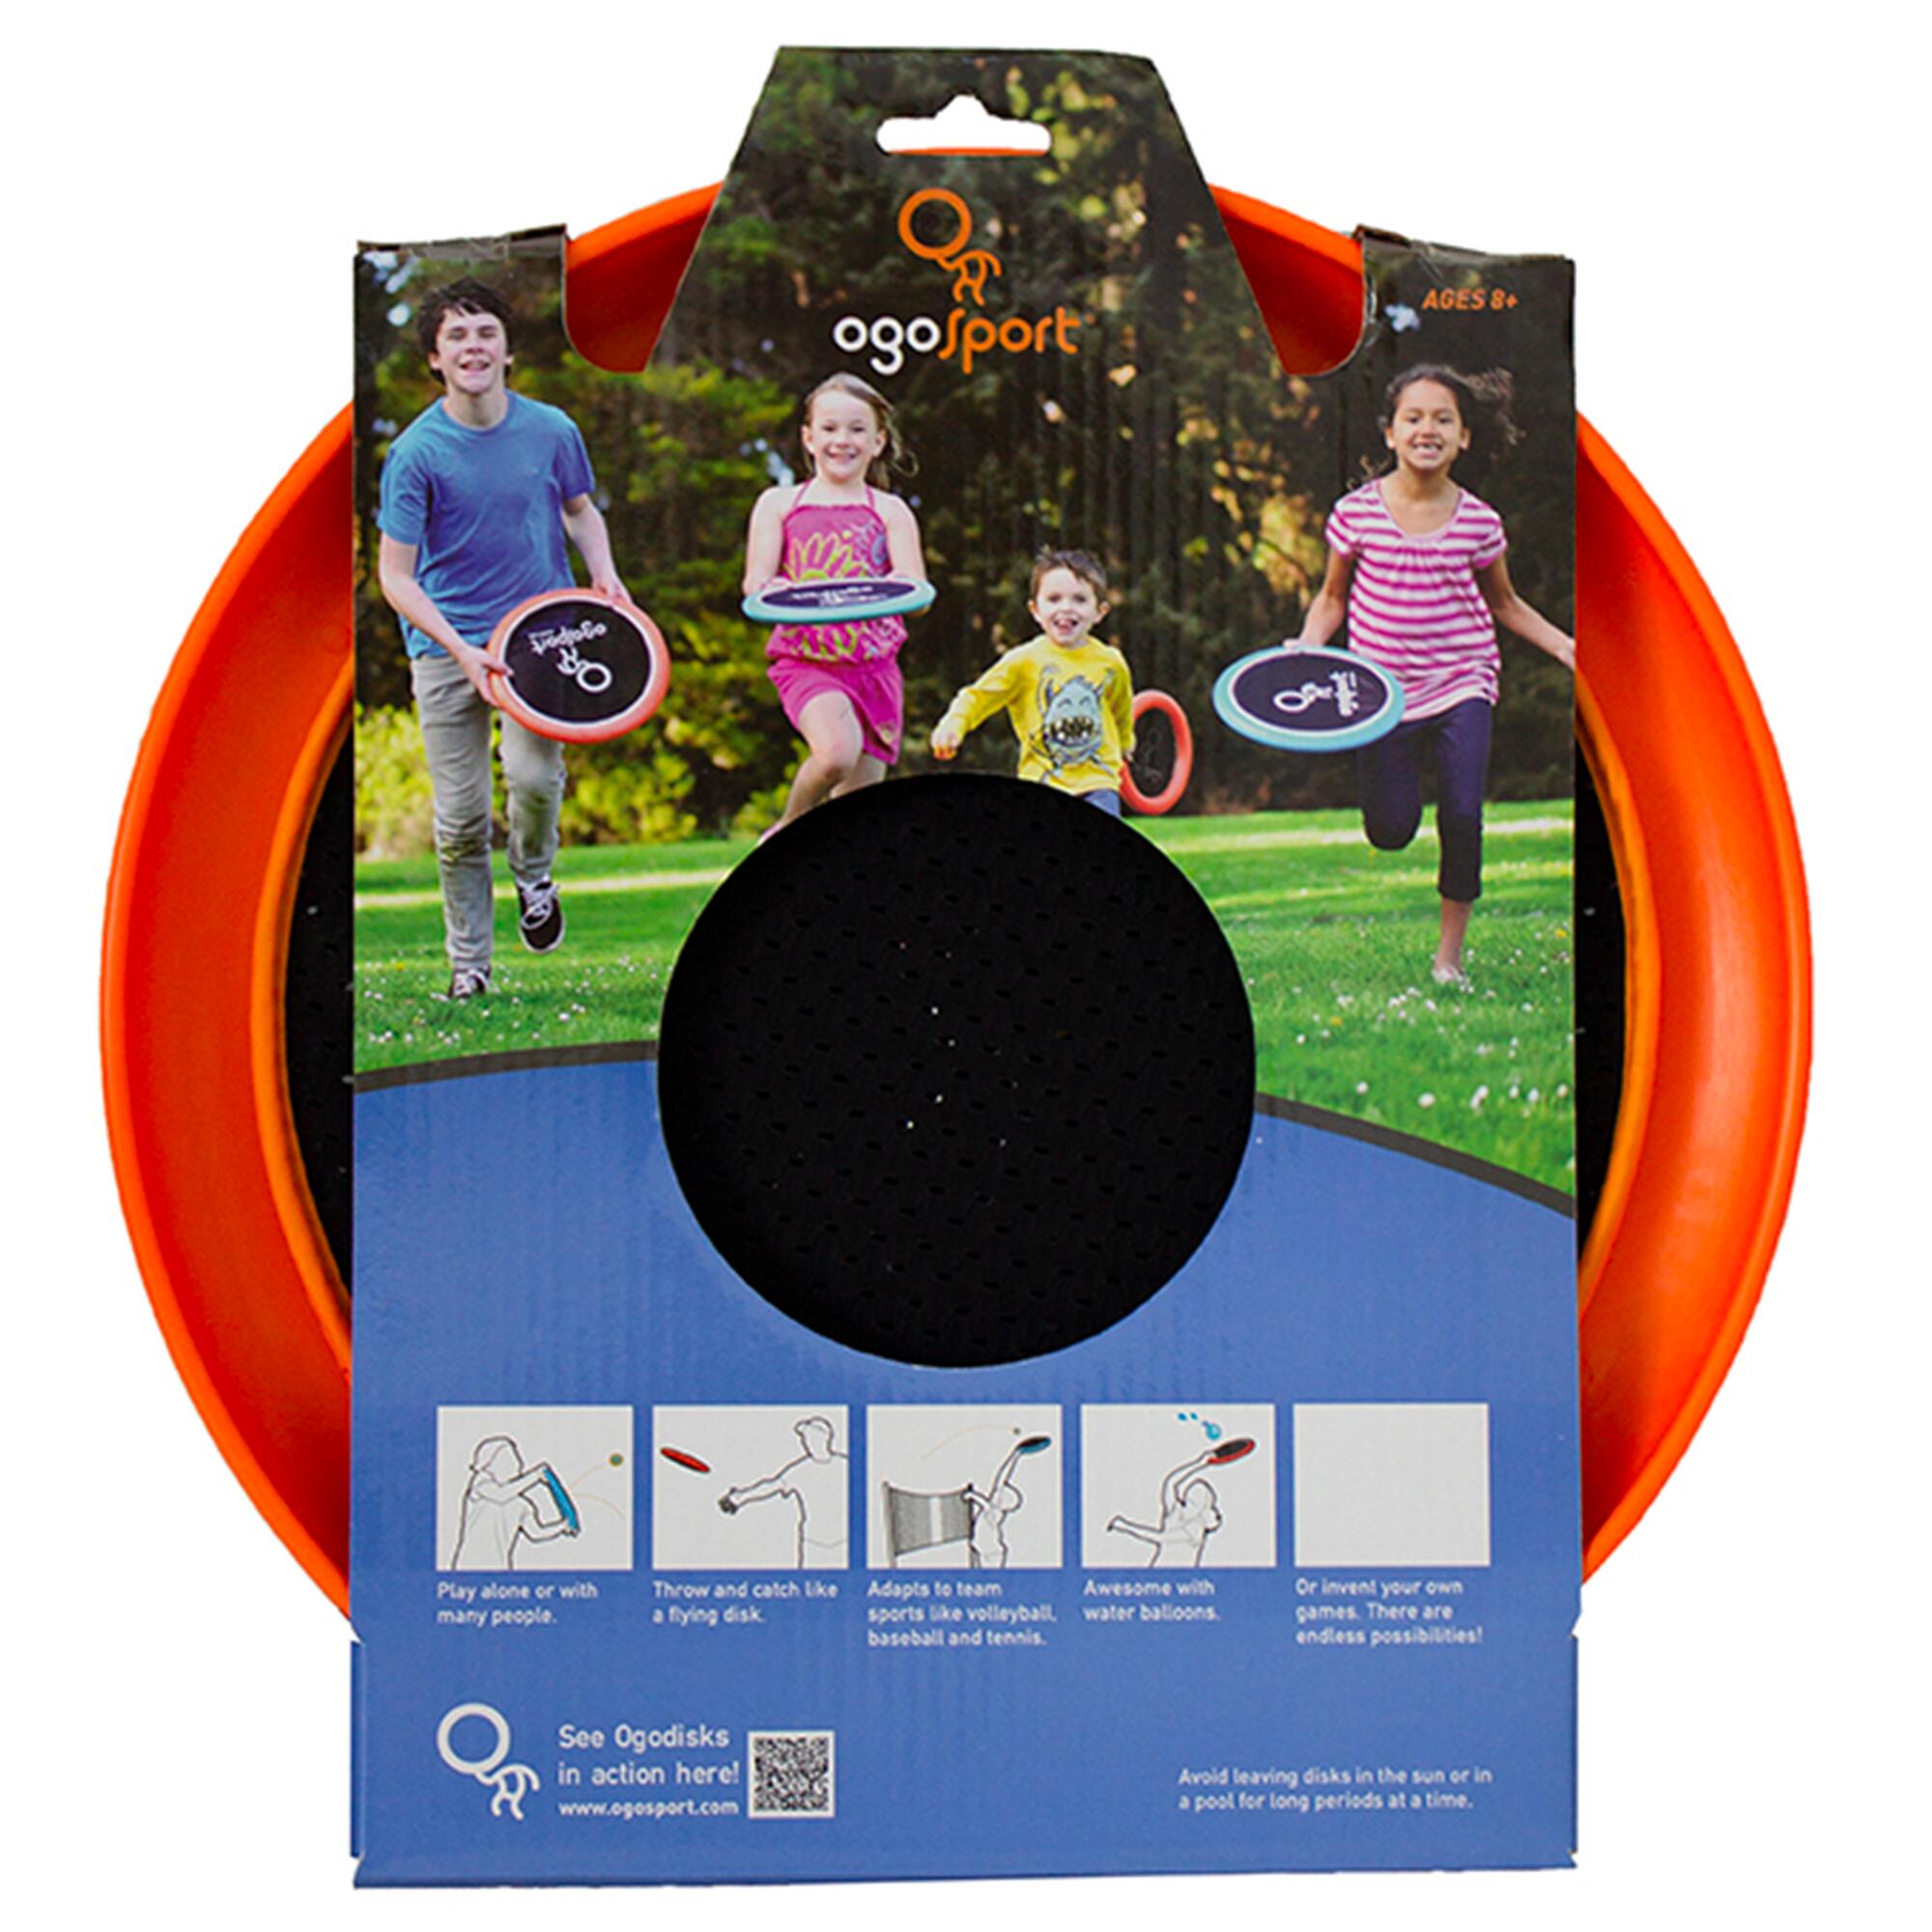 Discover how fun fly discs and racket sports can be. 5/6